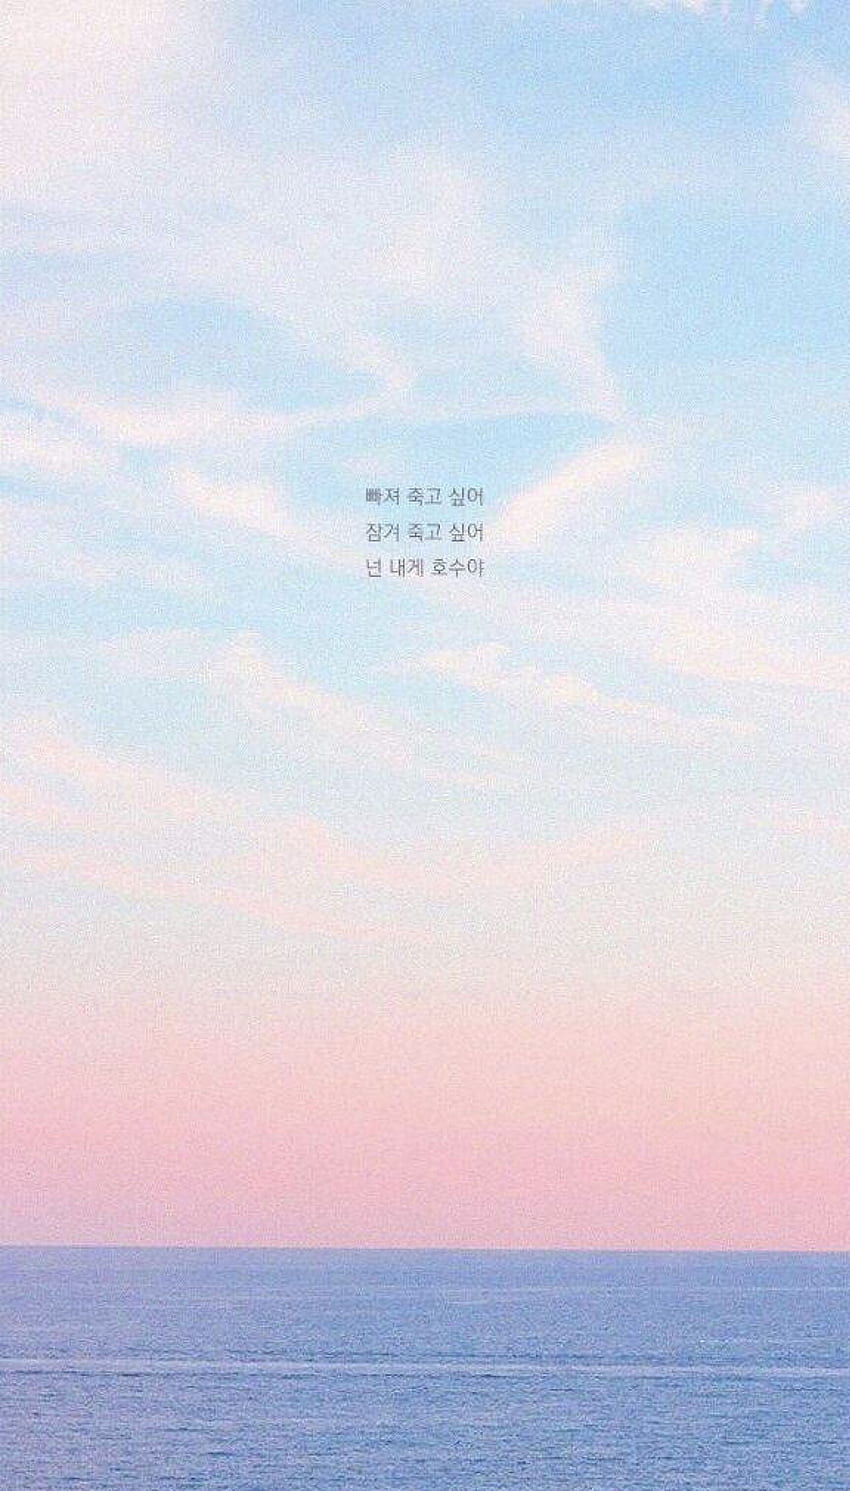 Aesthetic Inspirational Quote Pastel Wallpaper for Iphone  Your life   Iphone wallpaper quotes inspirational Inspirational phone wallpaper Ipad  wallpaper quotes